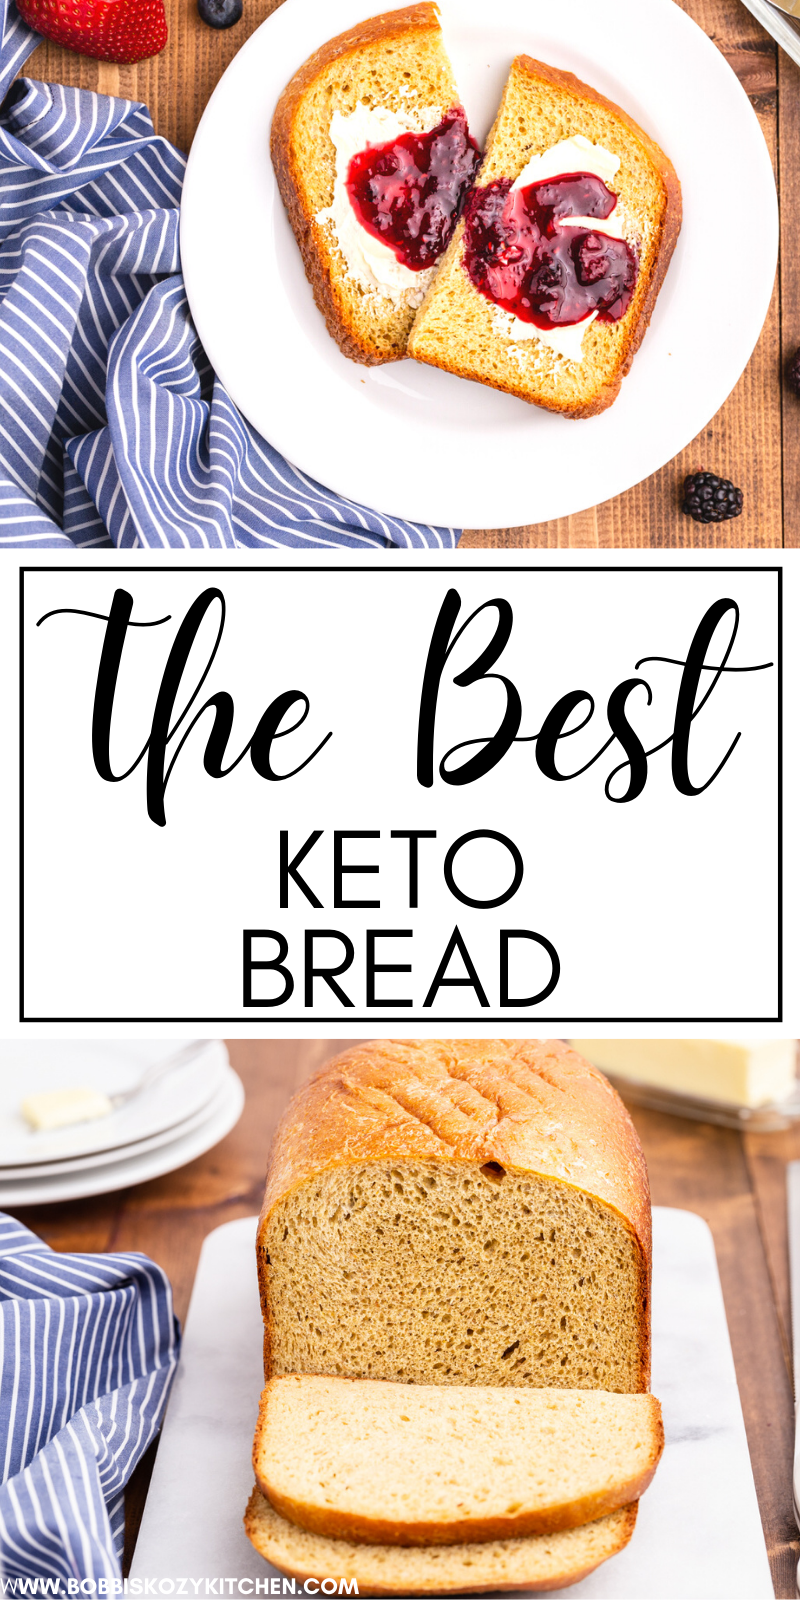 The BEST Keto Bread - If you have been looking for the best keto bread recipe look no further. This recipe creates a light loaf of bread that will make you think you are cheating on your diet, but you aren't! #keto #lowcarb #bread #recipe